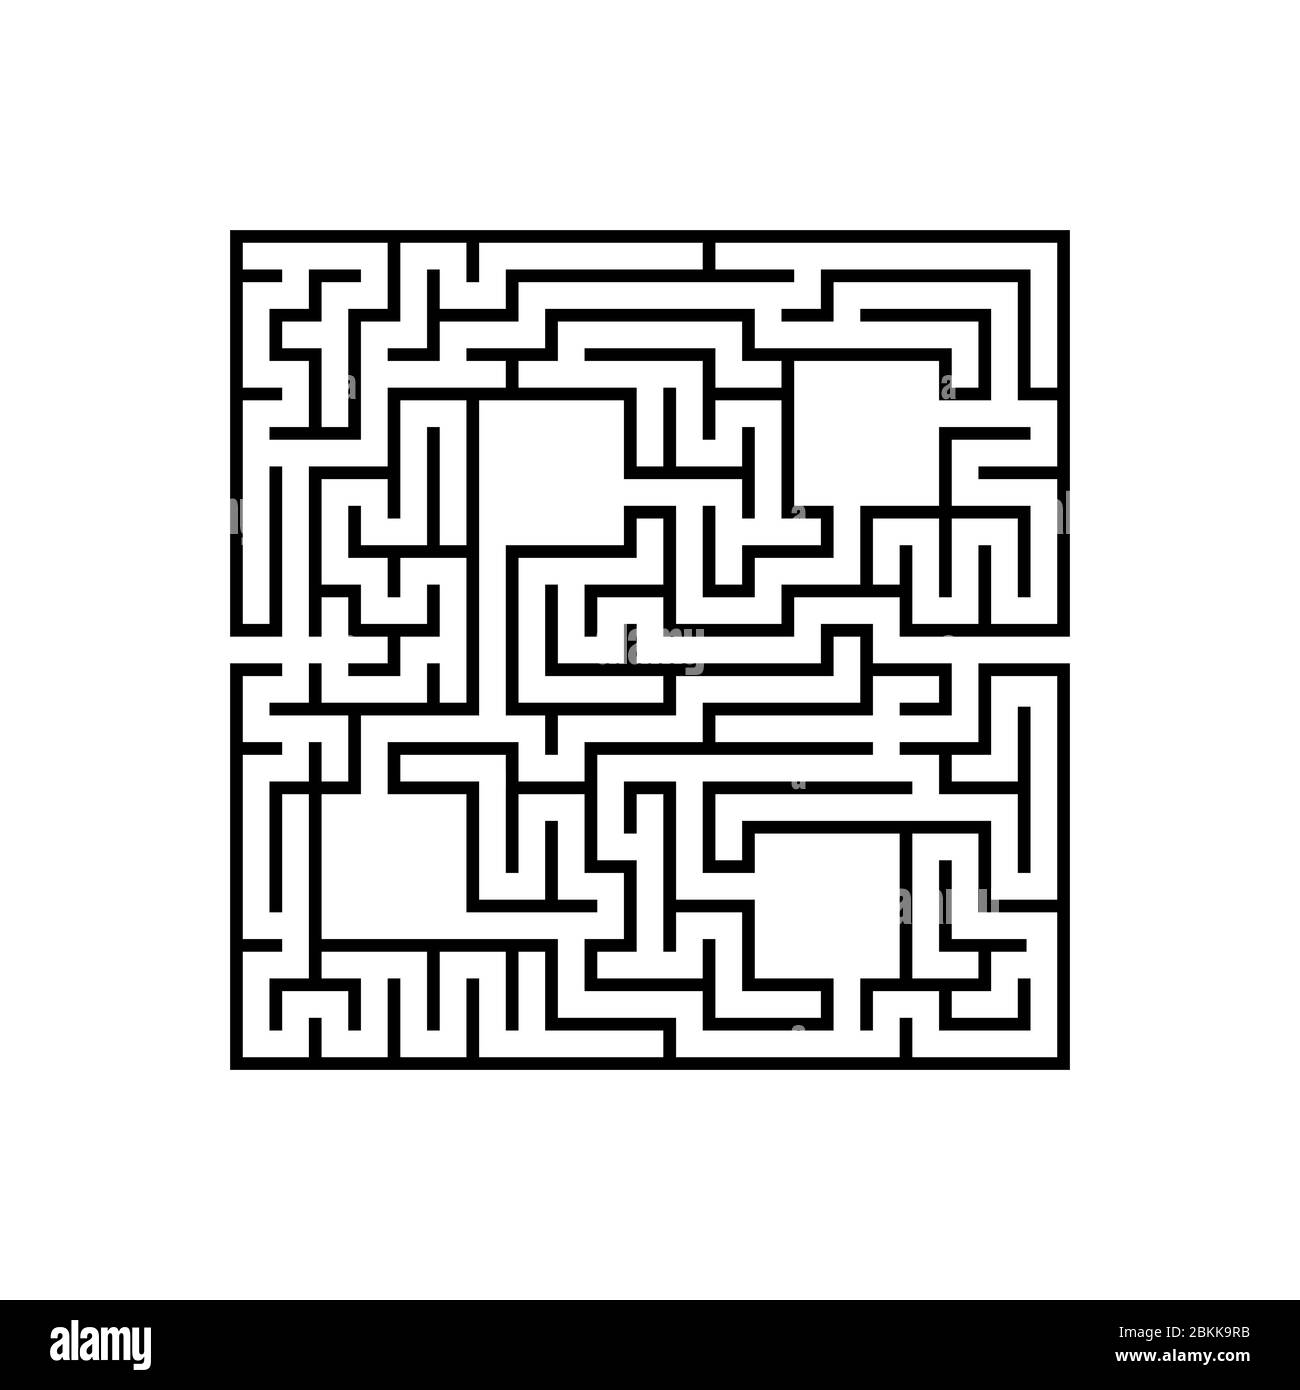 Abstact square labyrinth. Educational game for kids. Puzzle for children. Maze conundrum. Find the right path. Vector illustration. Stock Vector